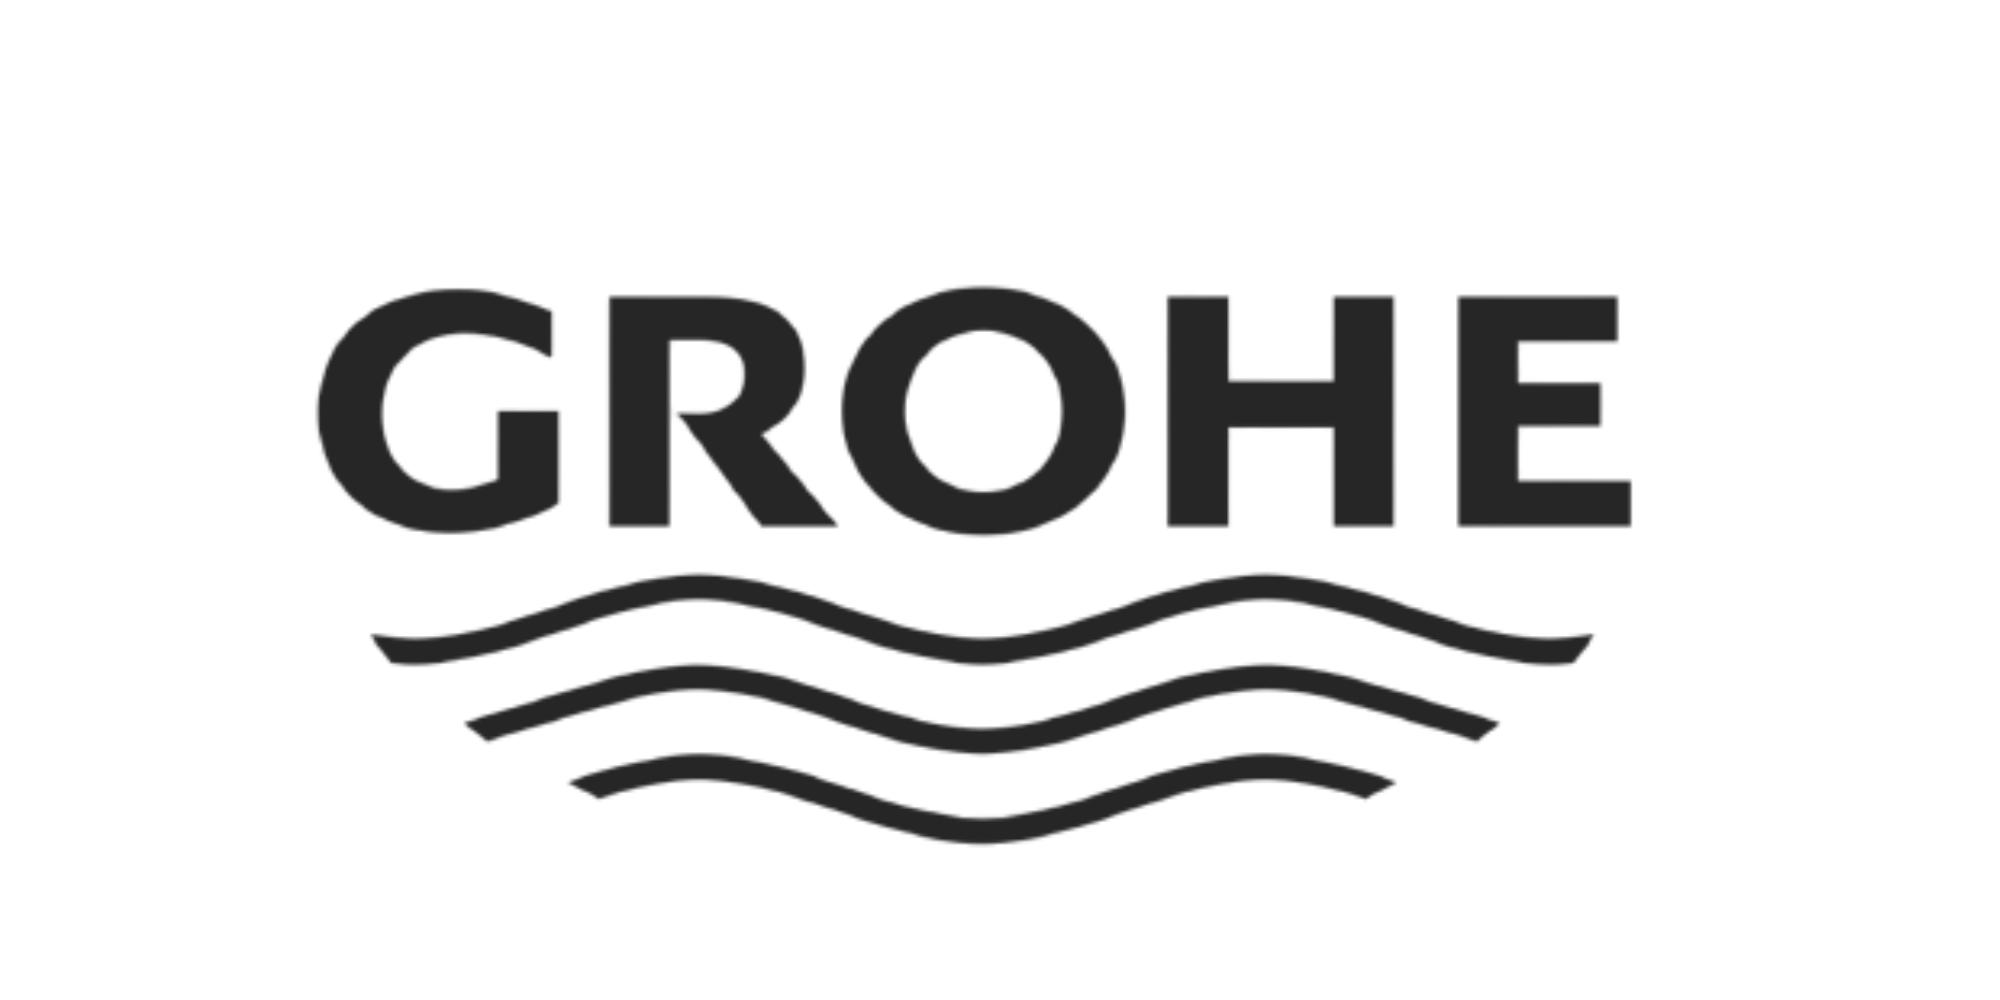 GROHE,transp